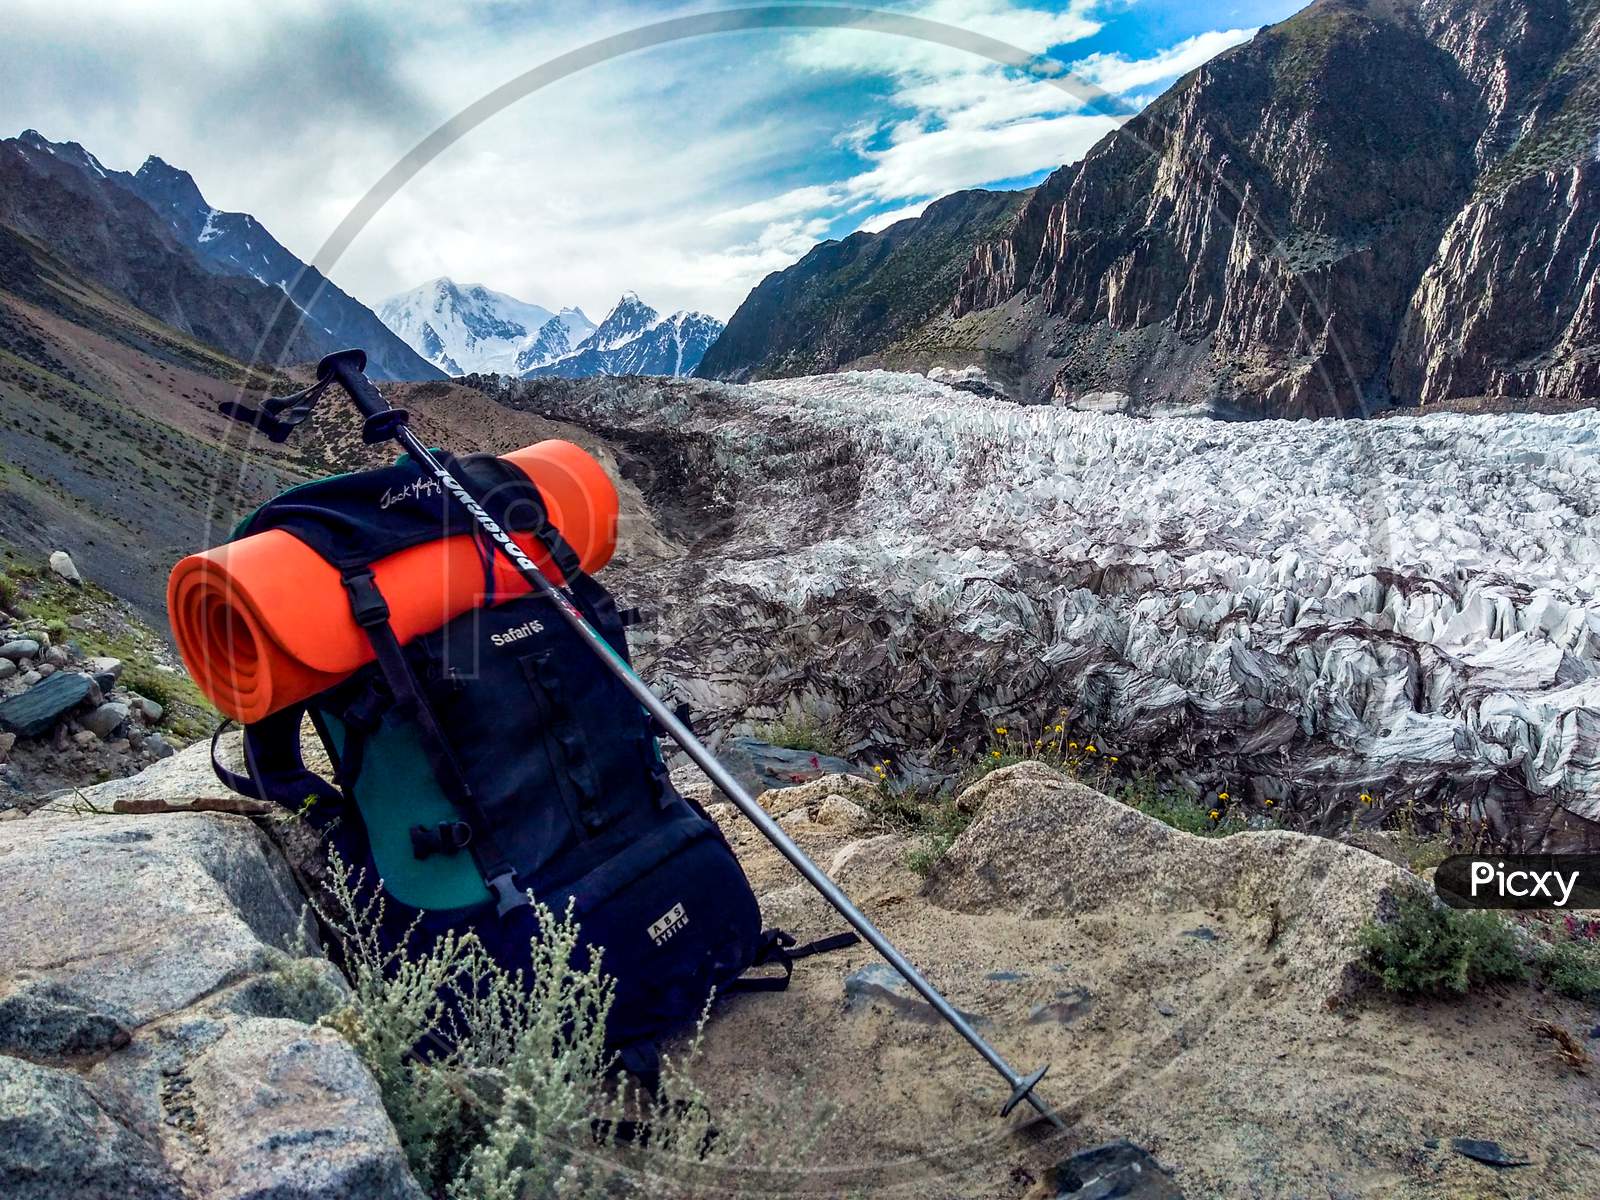 the mountaineer's backpack